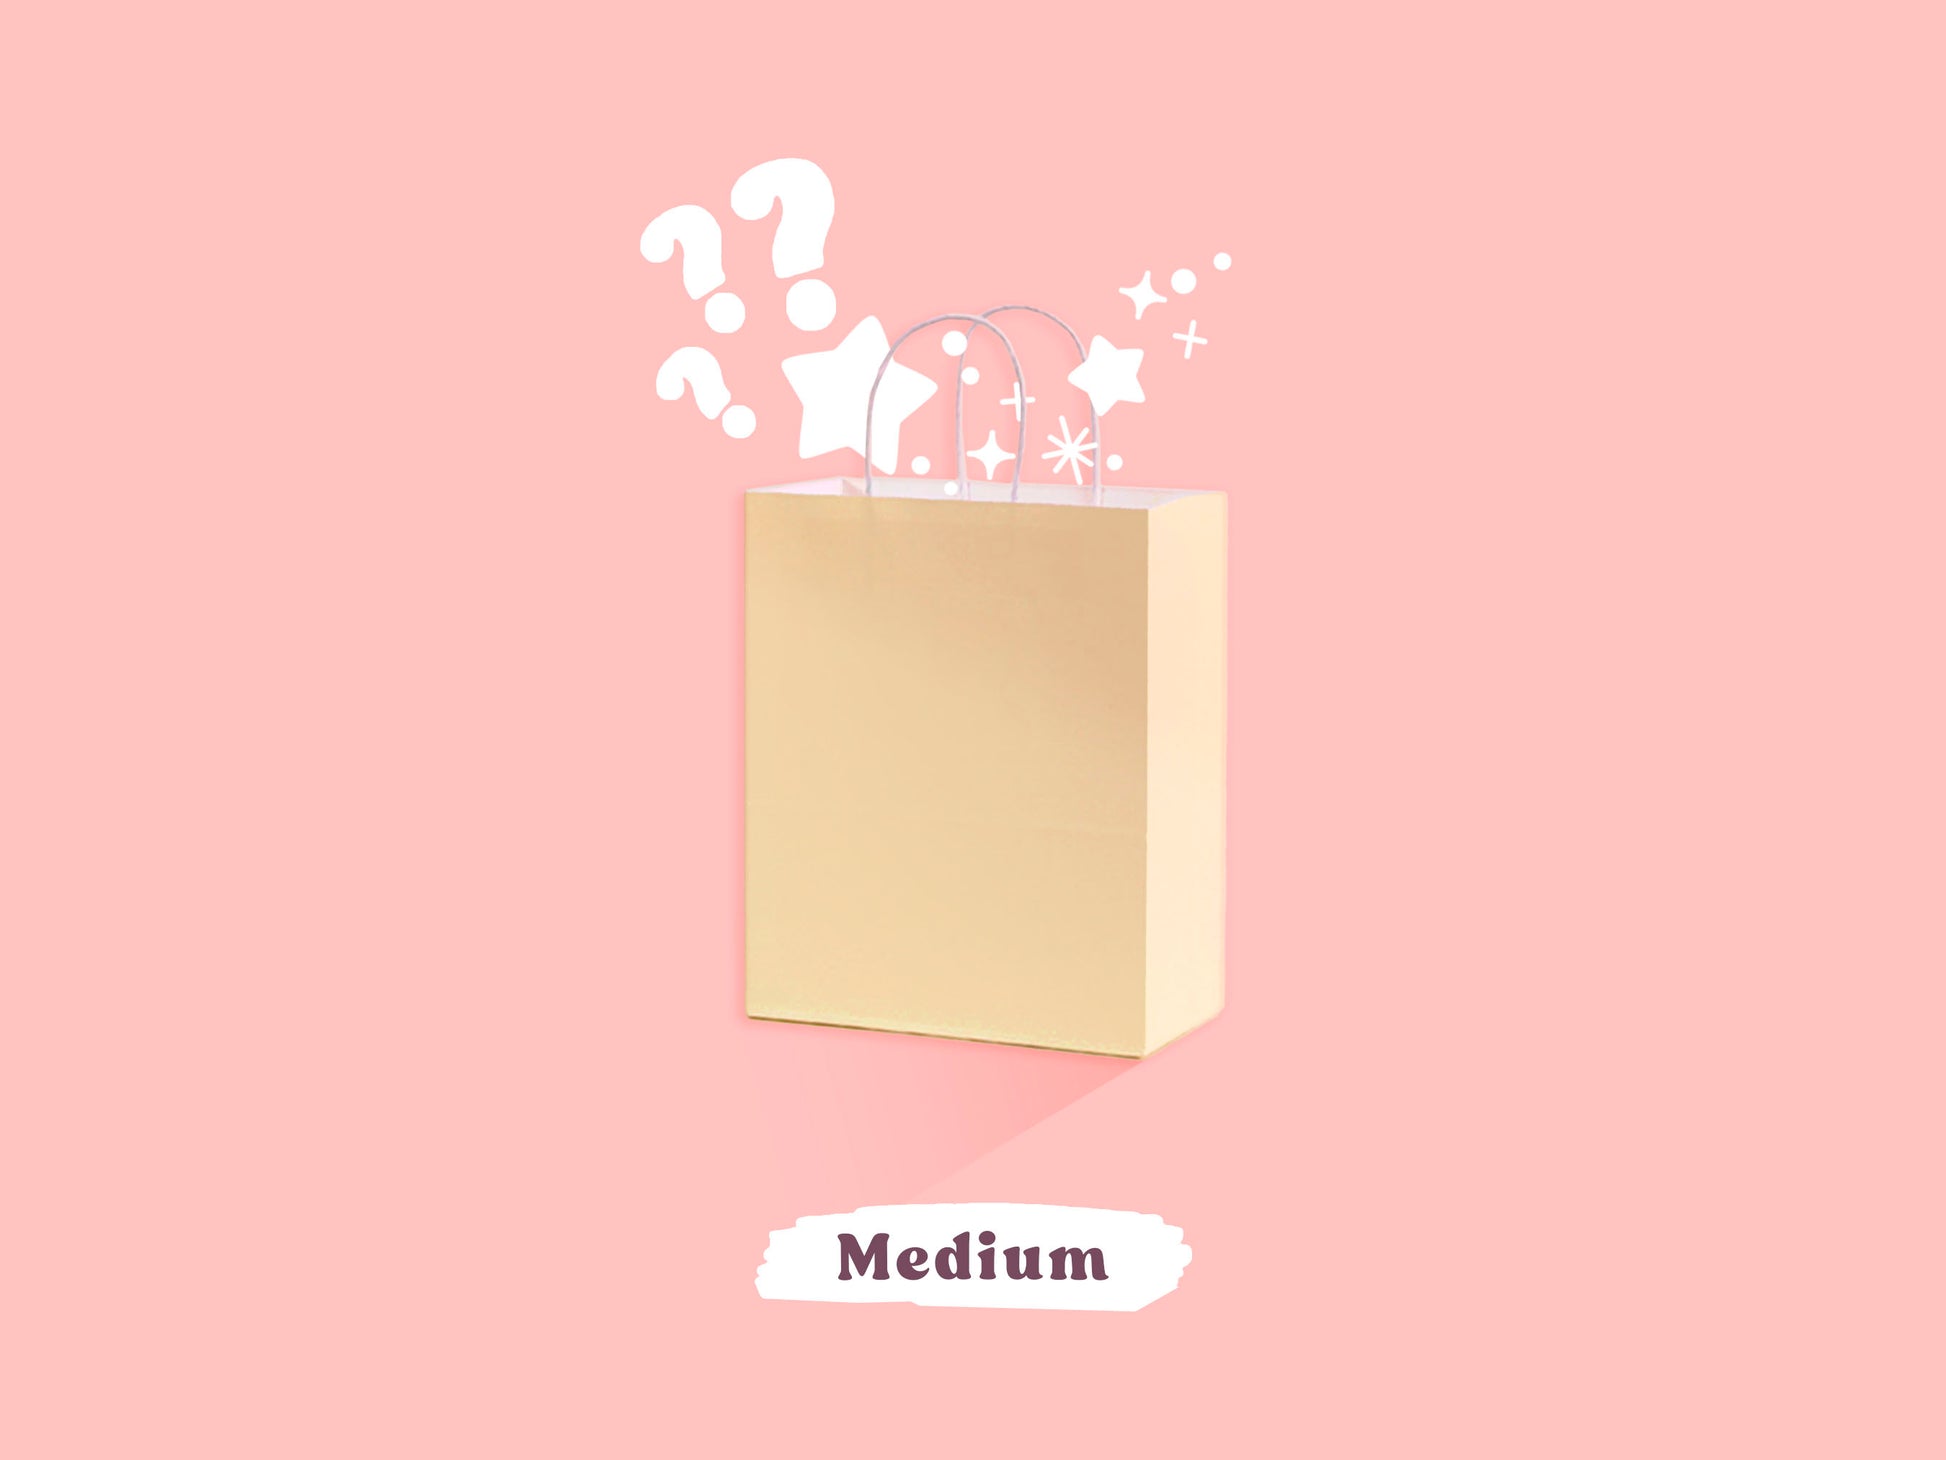 A pastel yellow paper mystery bag open with cartoon stars falling out of it, surrounded by the word Medium